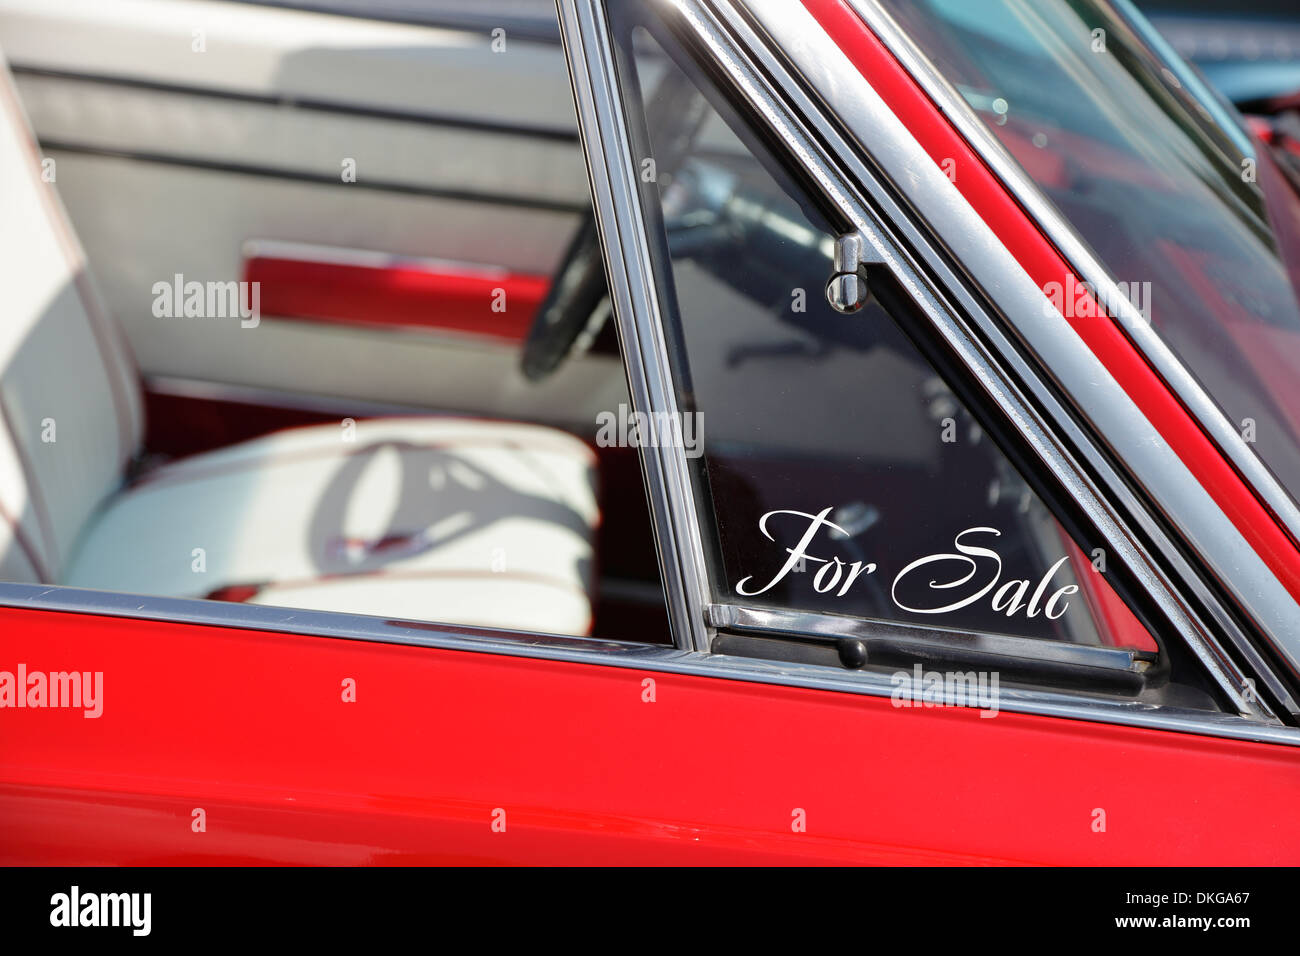 A 'for sale' decal on a vintage convertible at a classic car show, USA Stock Photo